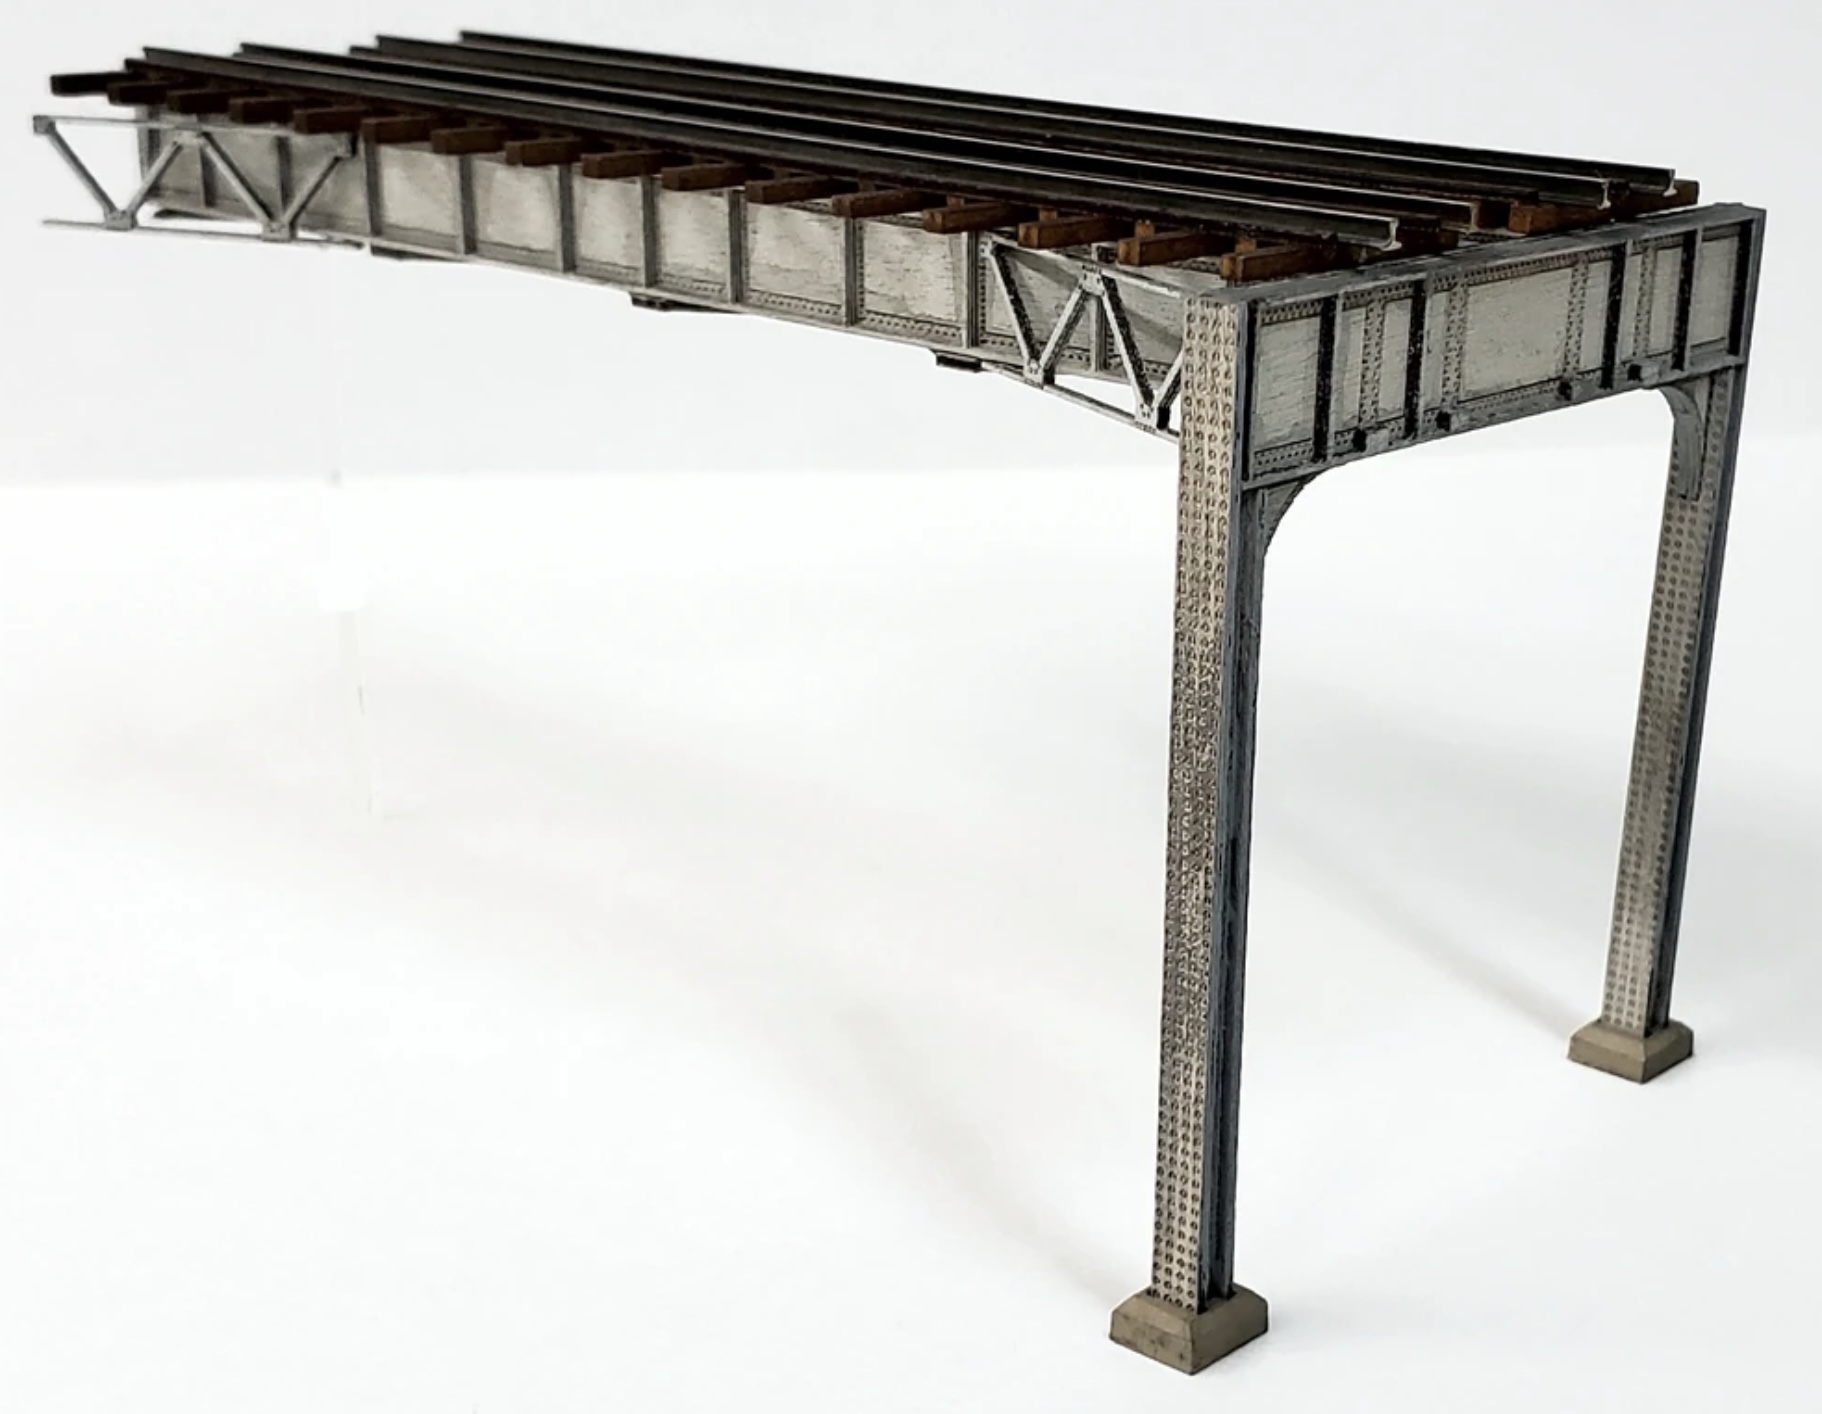 N Scale - ITLA - N-NY ELEVATED EXT - Structure, Railroad, Elevated Track - Railroad Structures